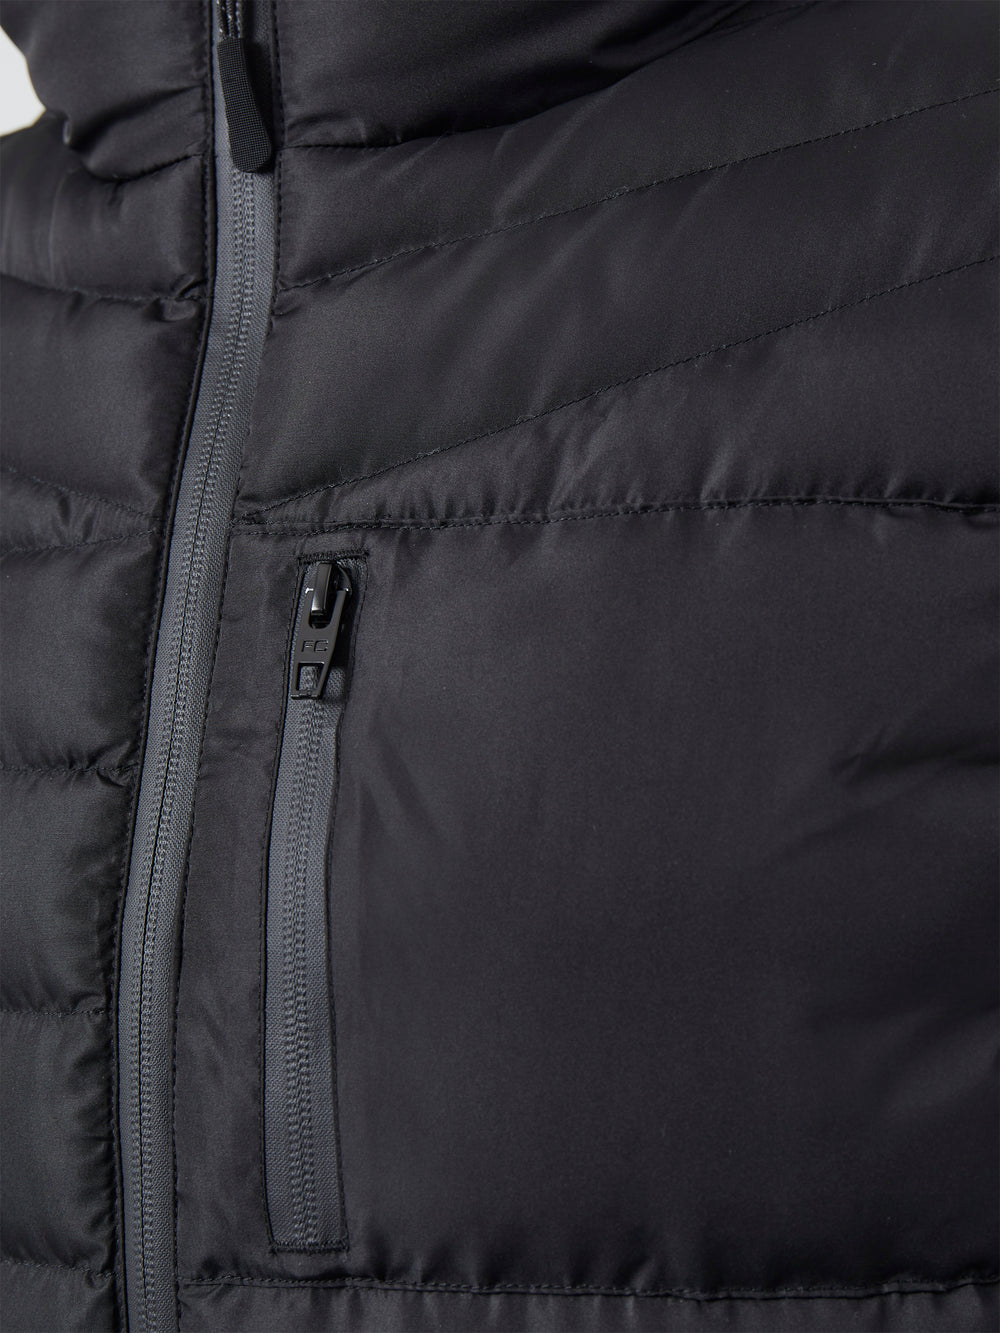 Hooded Puffer Row Gilet Black | French Connection UK